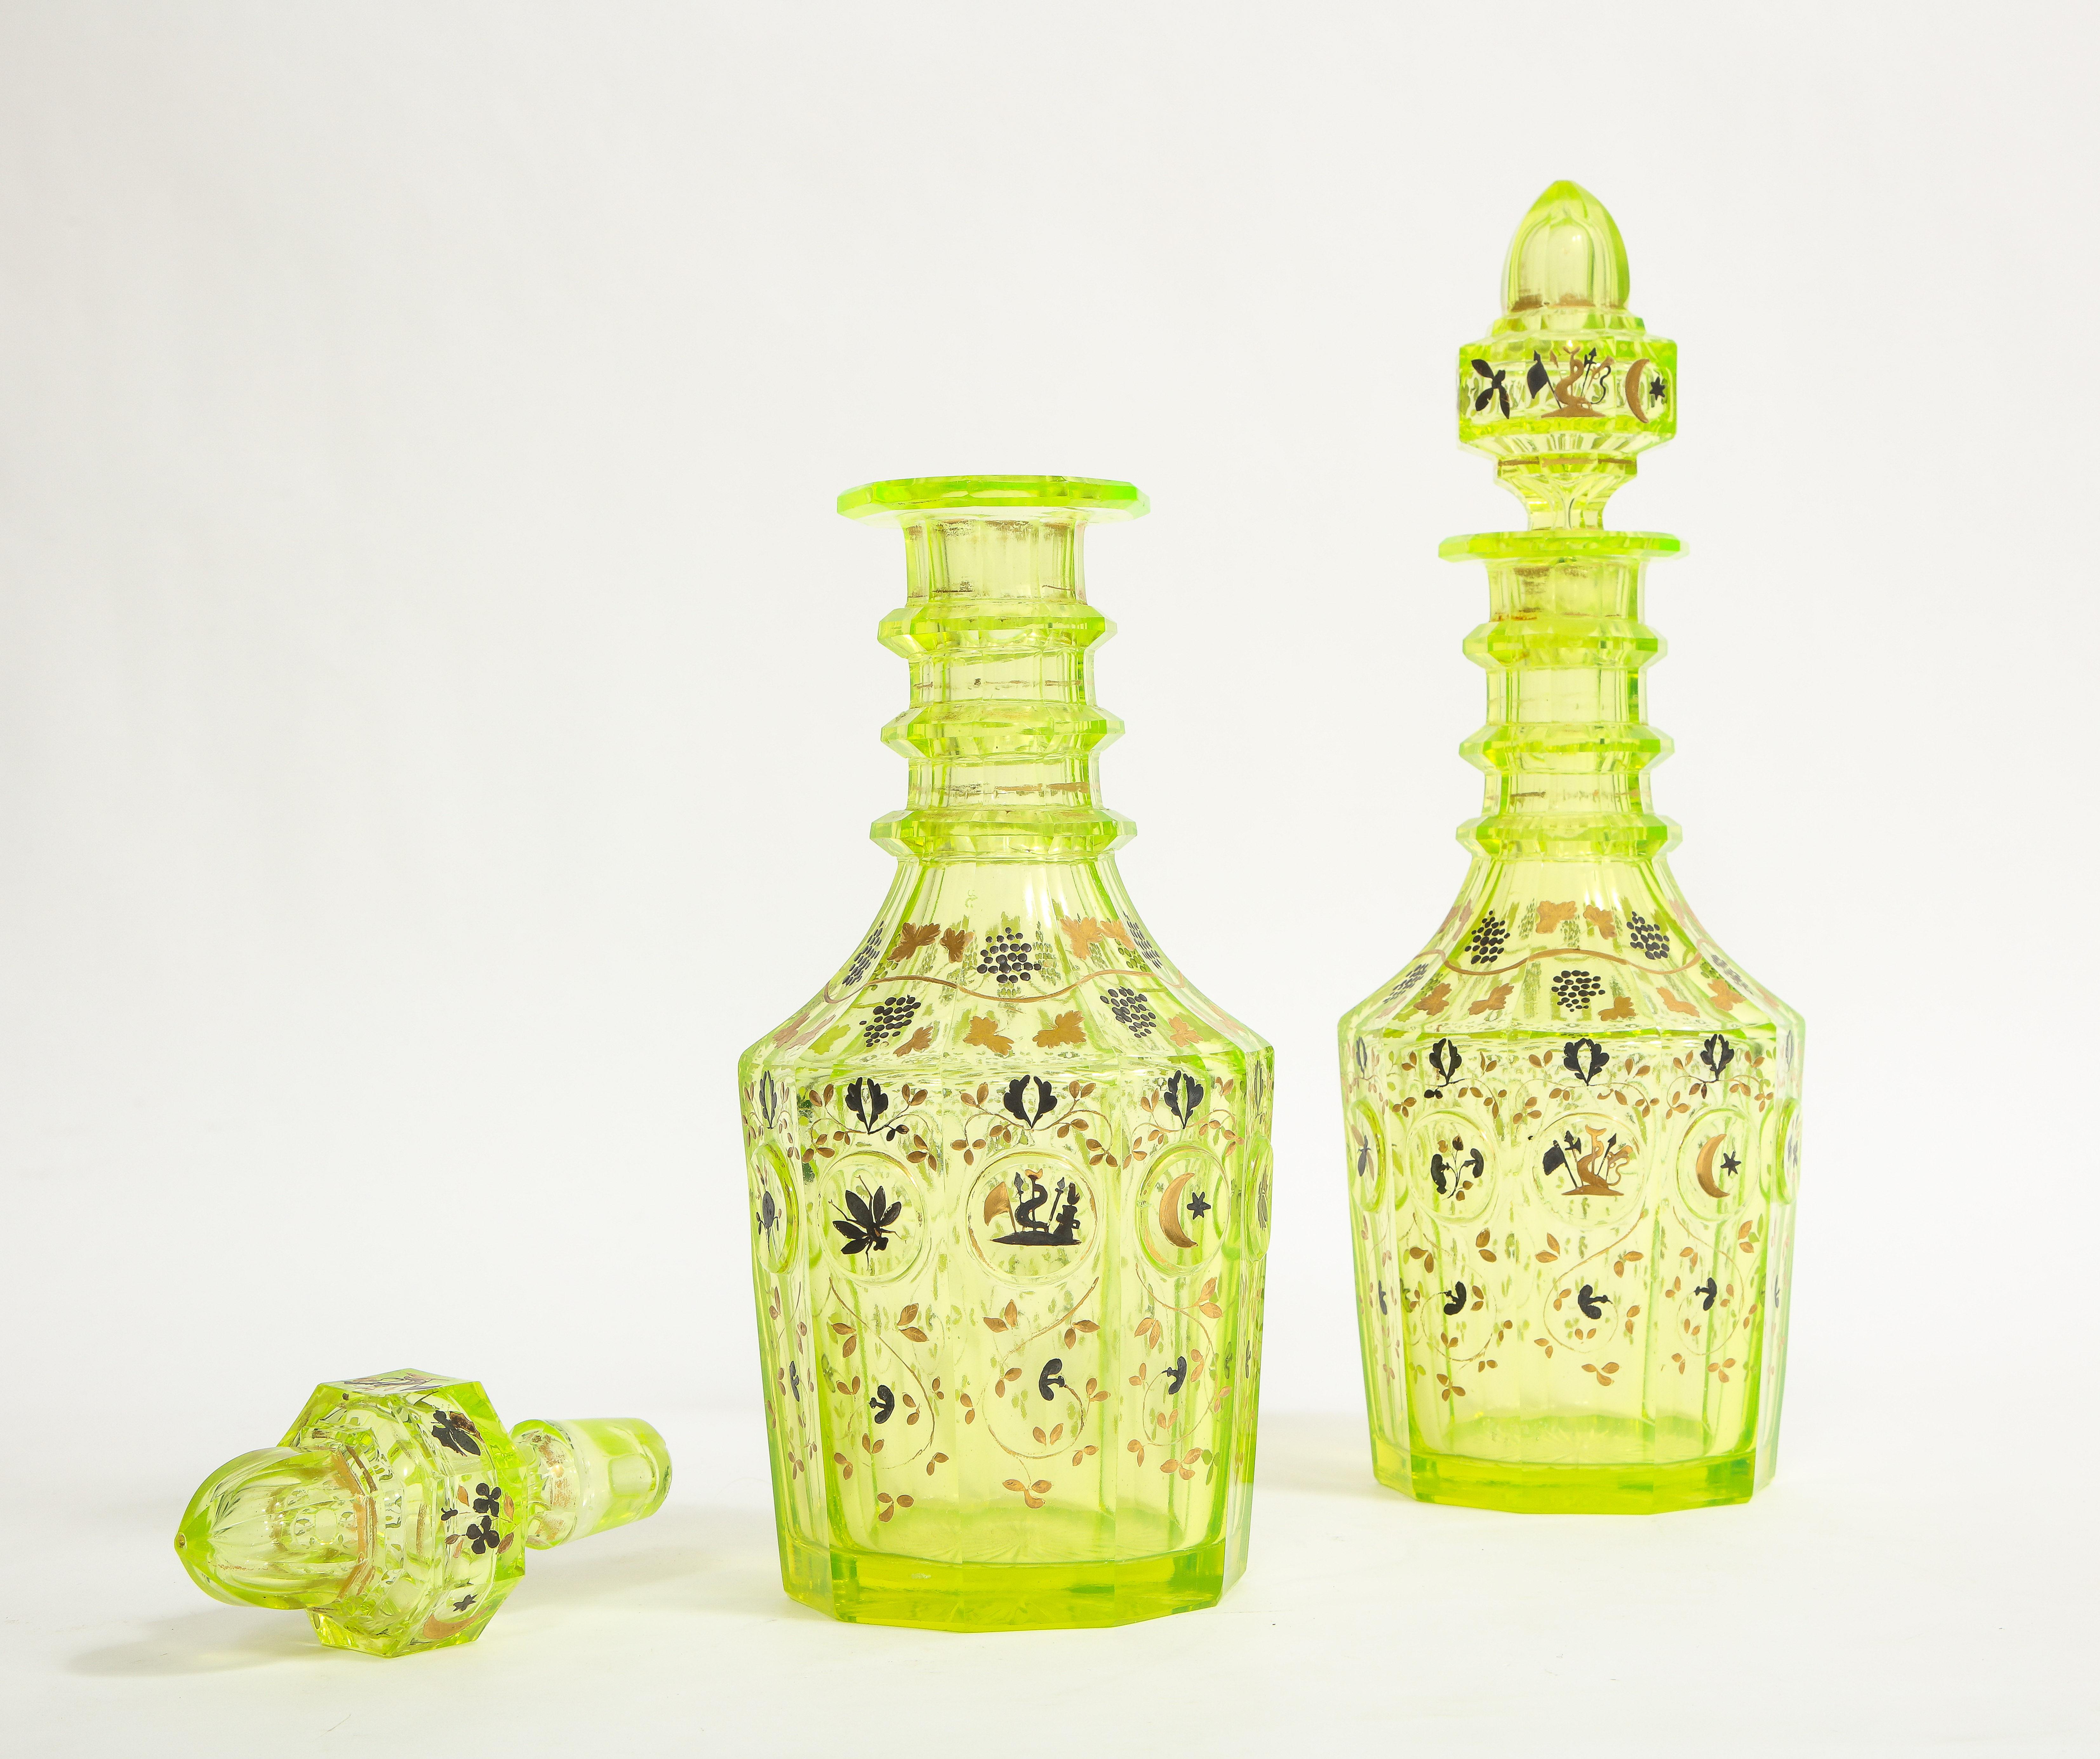 Hand-Carved Rare Pair of 19th C. Bohemian Uranium Color Decanters Ottoman/Turkish Market For Sale